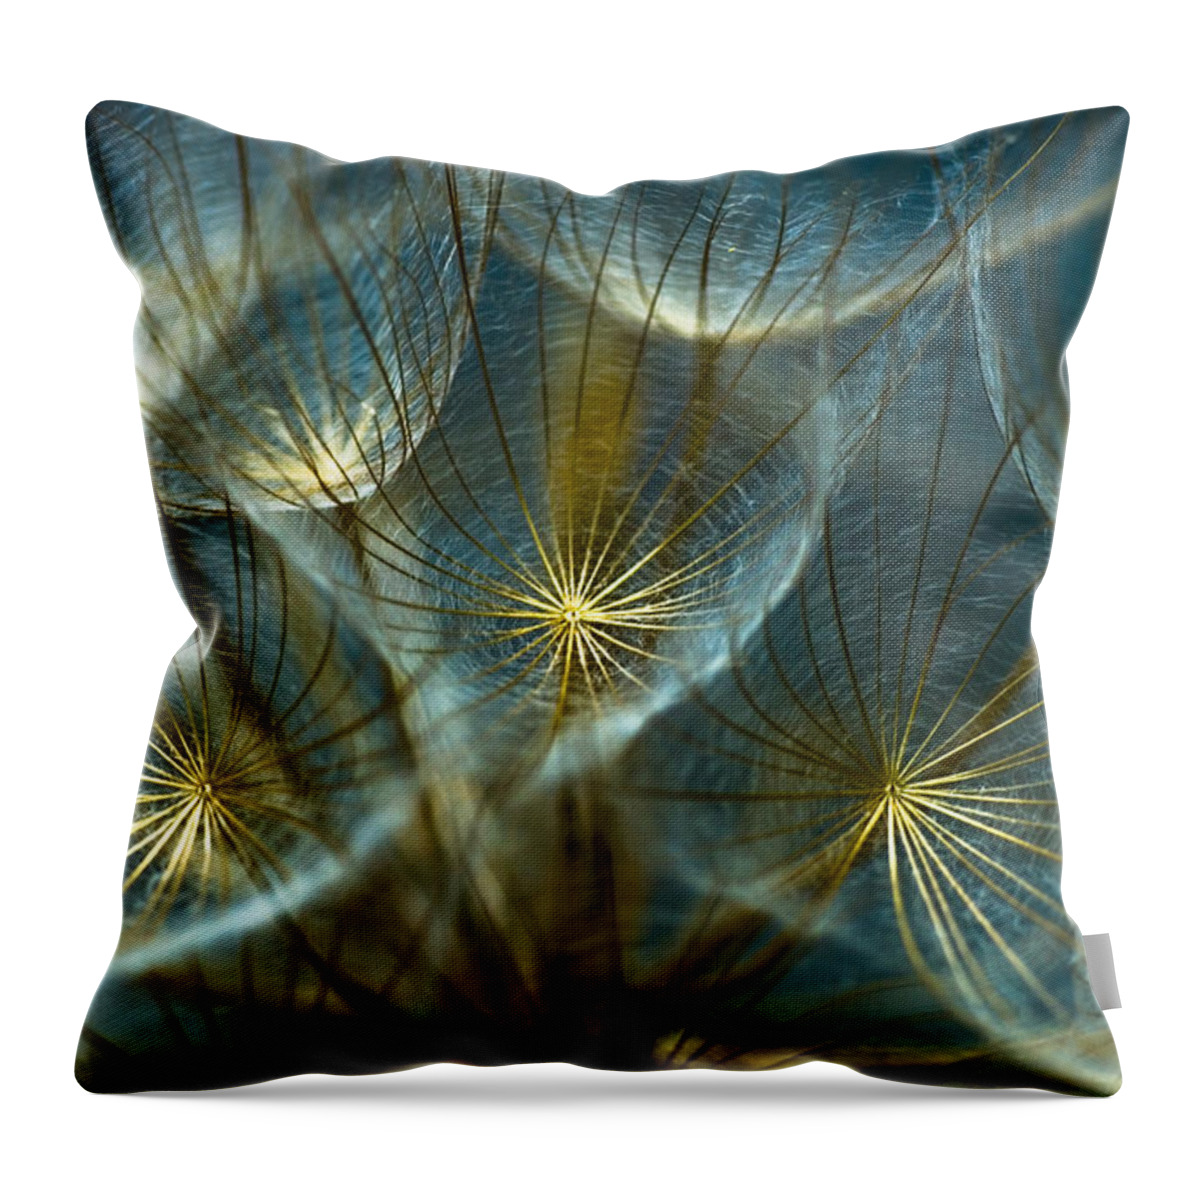 Dandelion Throw Pillow featuring the photograph Translucid Dandelions by Iris Greenwell